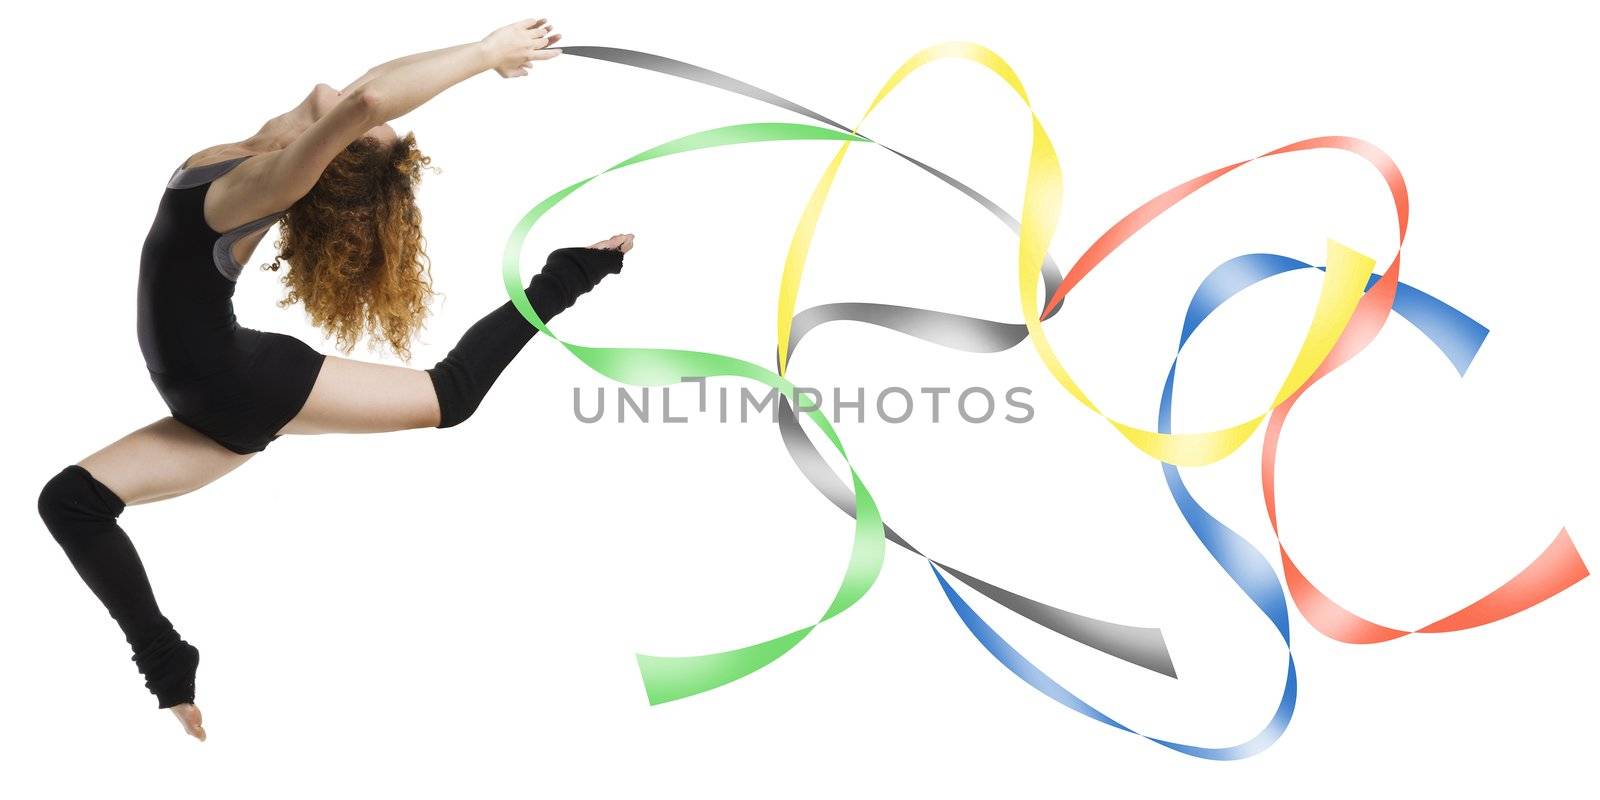 a modern dancer with black dress jumping with colored strings Olympic color